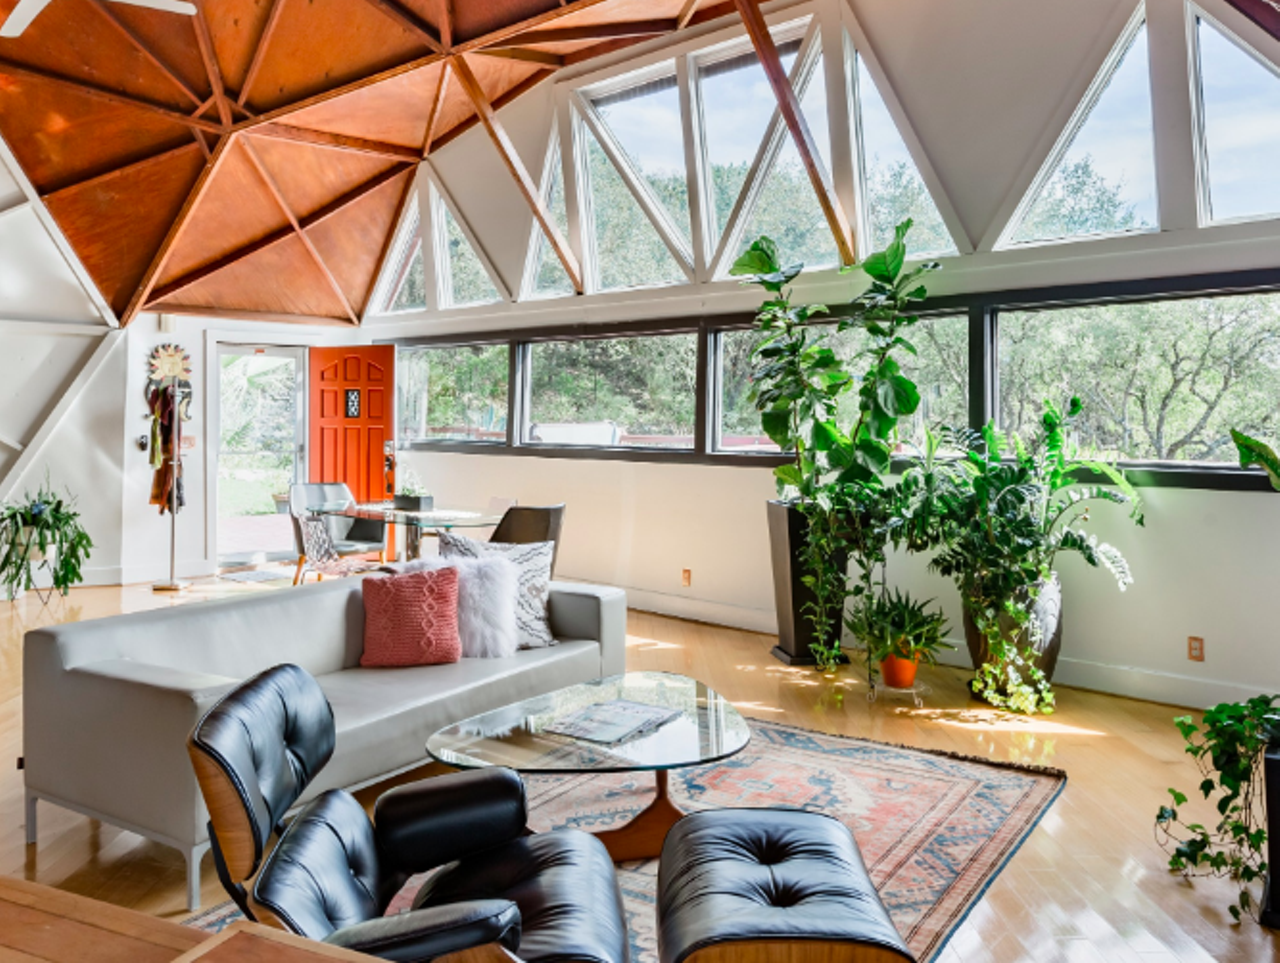 Round up your pals and pitch in to stay at Dome Sweet Dome. This one-of-a-kind structure houses contemporary furniture and decorations for a sleek, yet unique getaway.